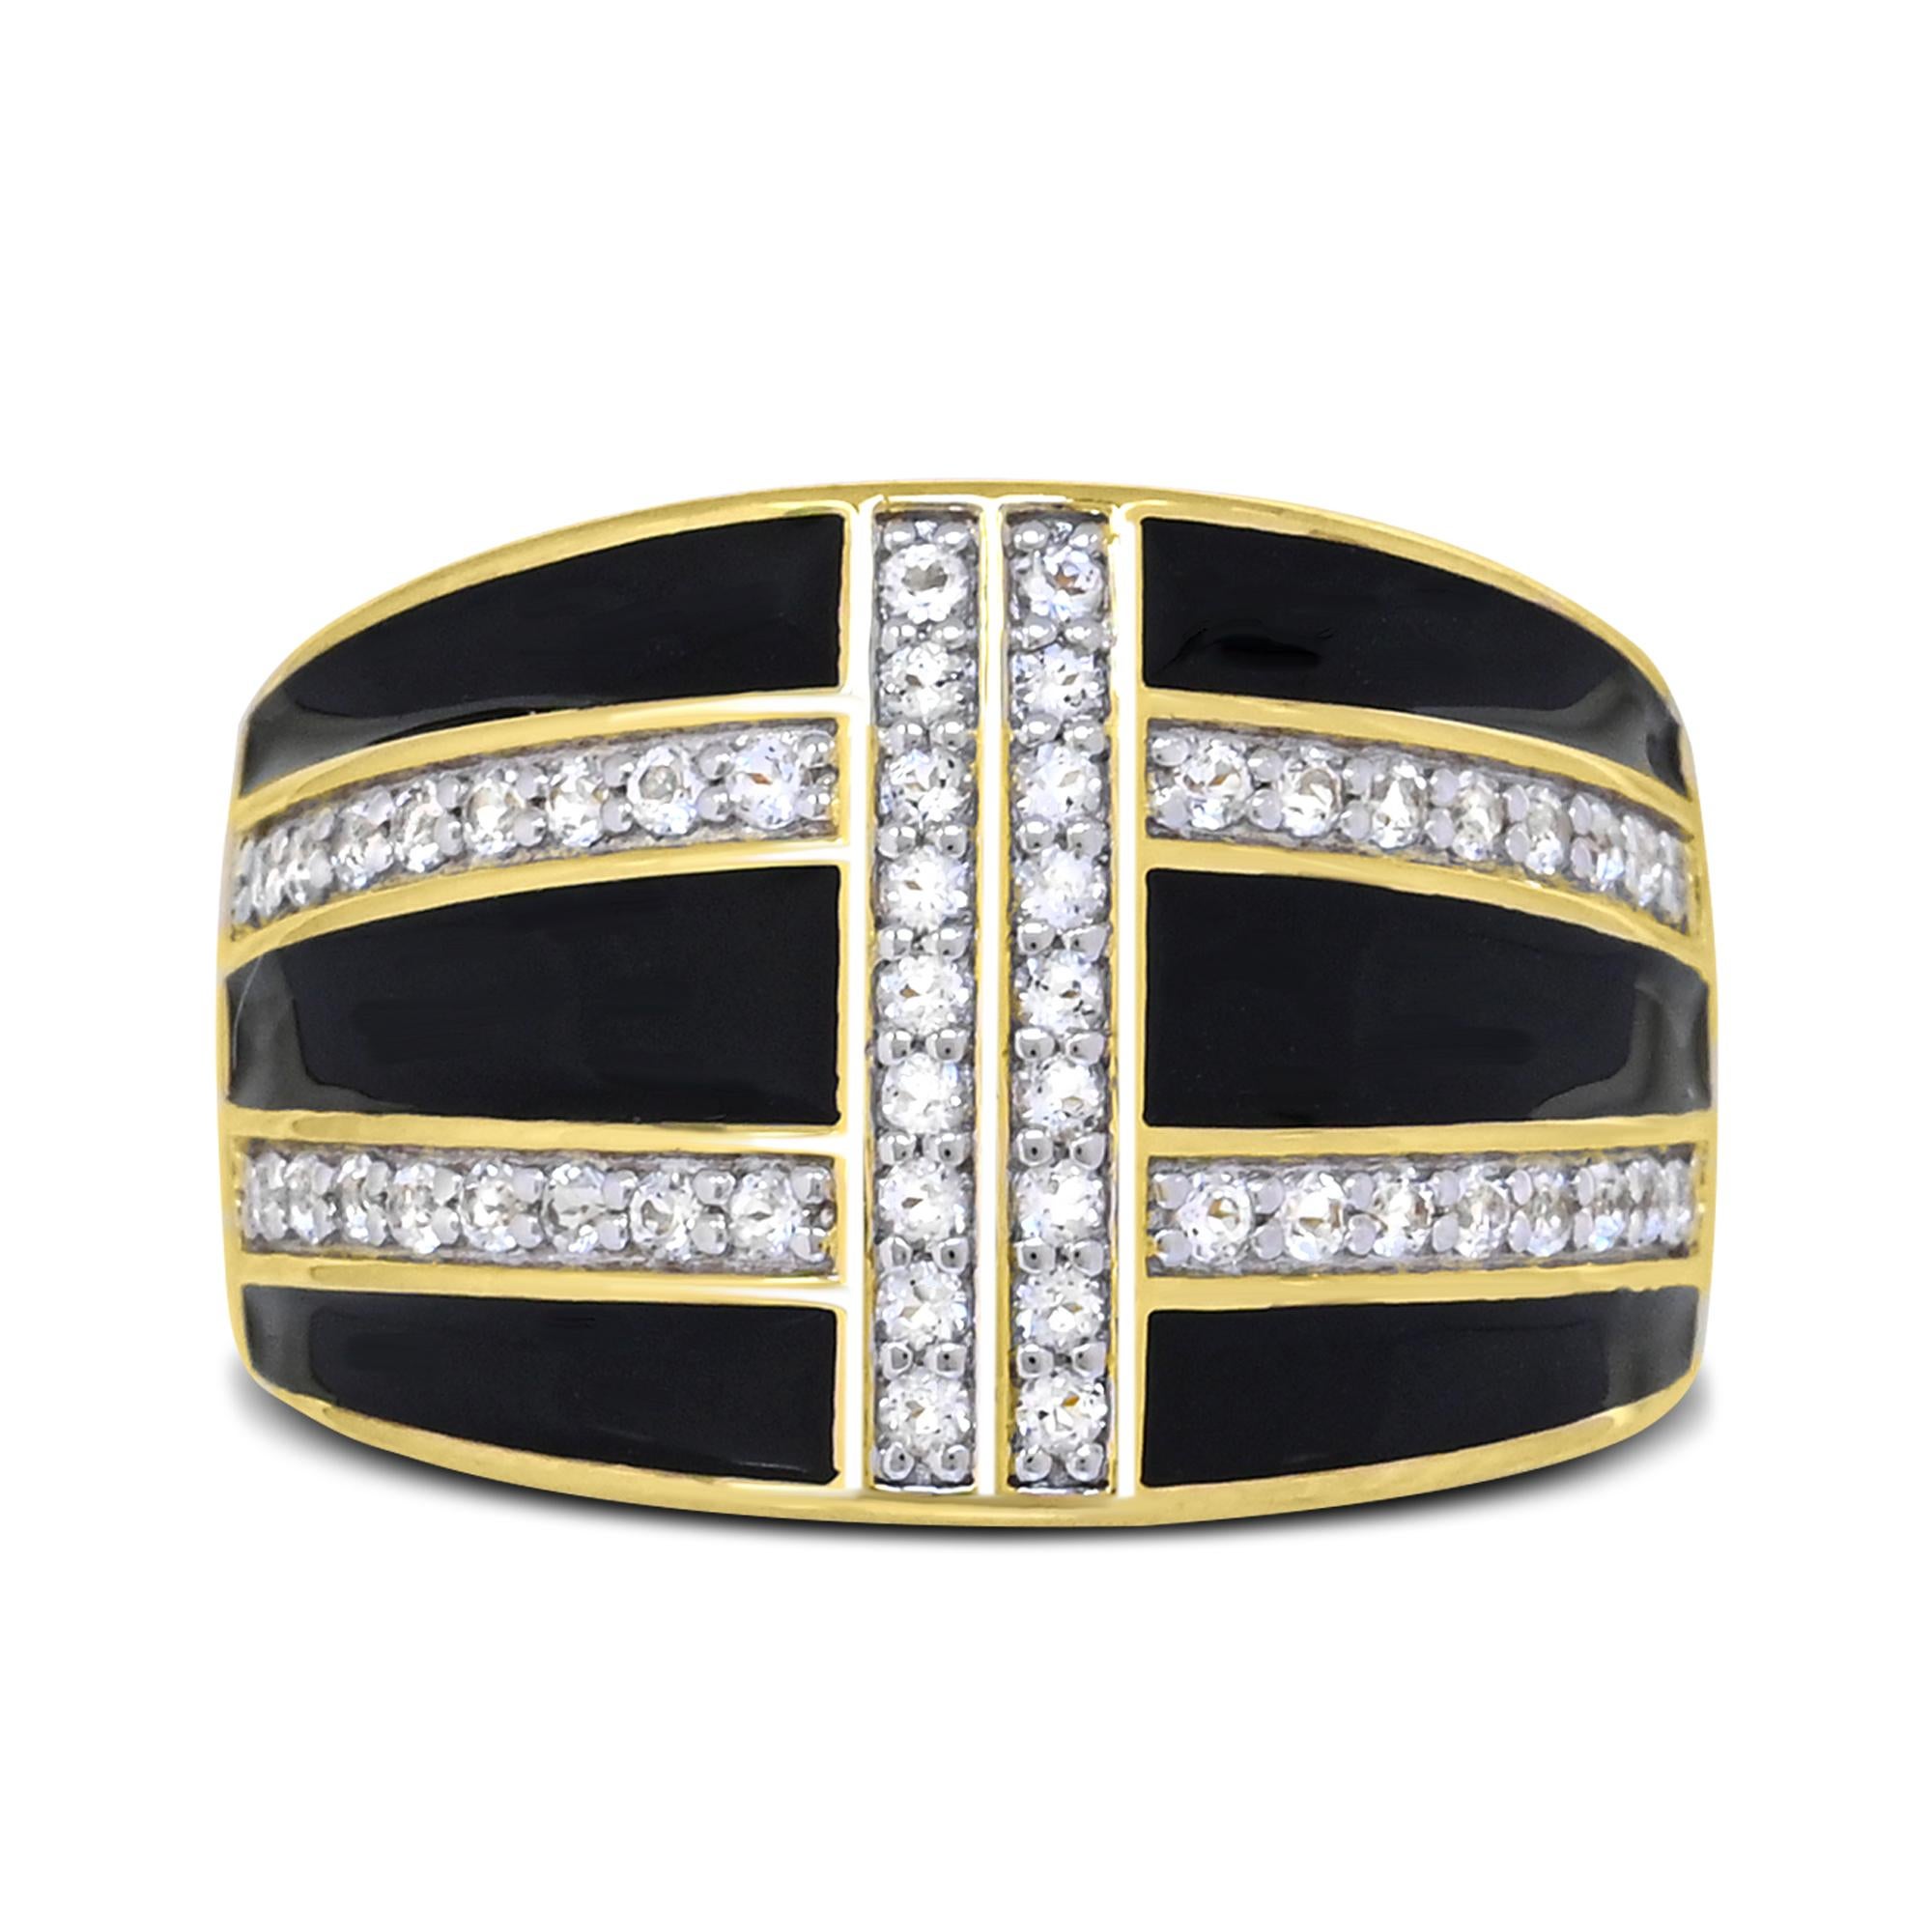 Indulge in the uniqueness of our White Topaz and Black Enamel 14K Yellow Gold over Sterling Silver Band Ring. Crafted with meticulous attention to detail, this ring boasts a charming combination of pave setting white topaz embedded in black enamel.